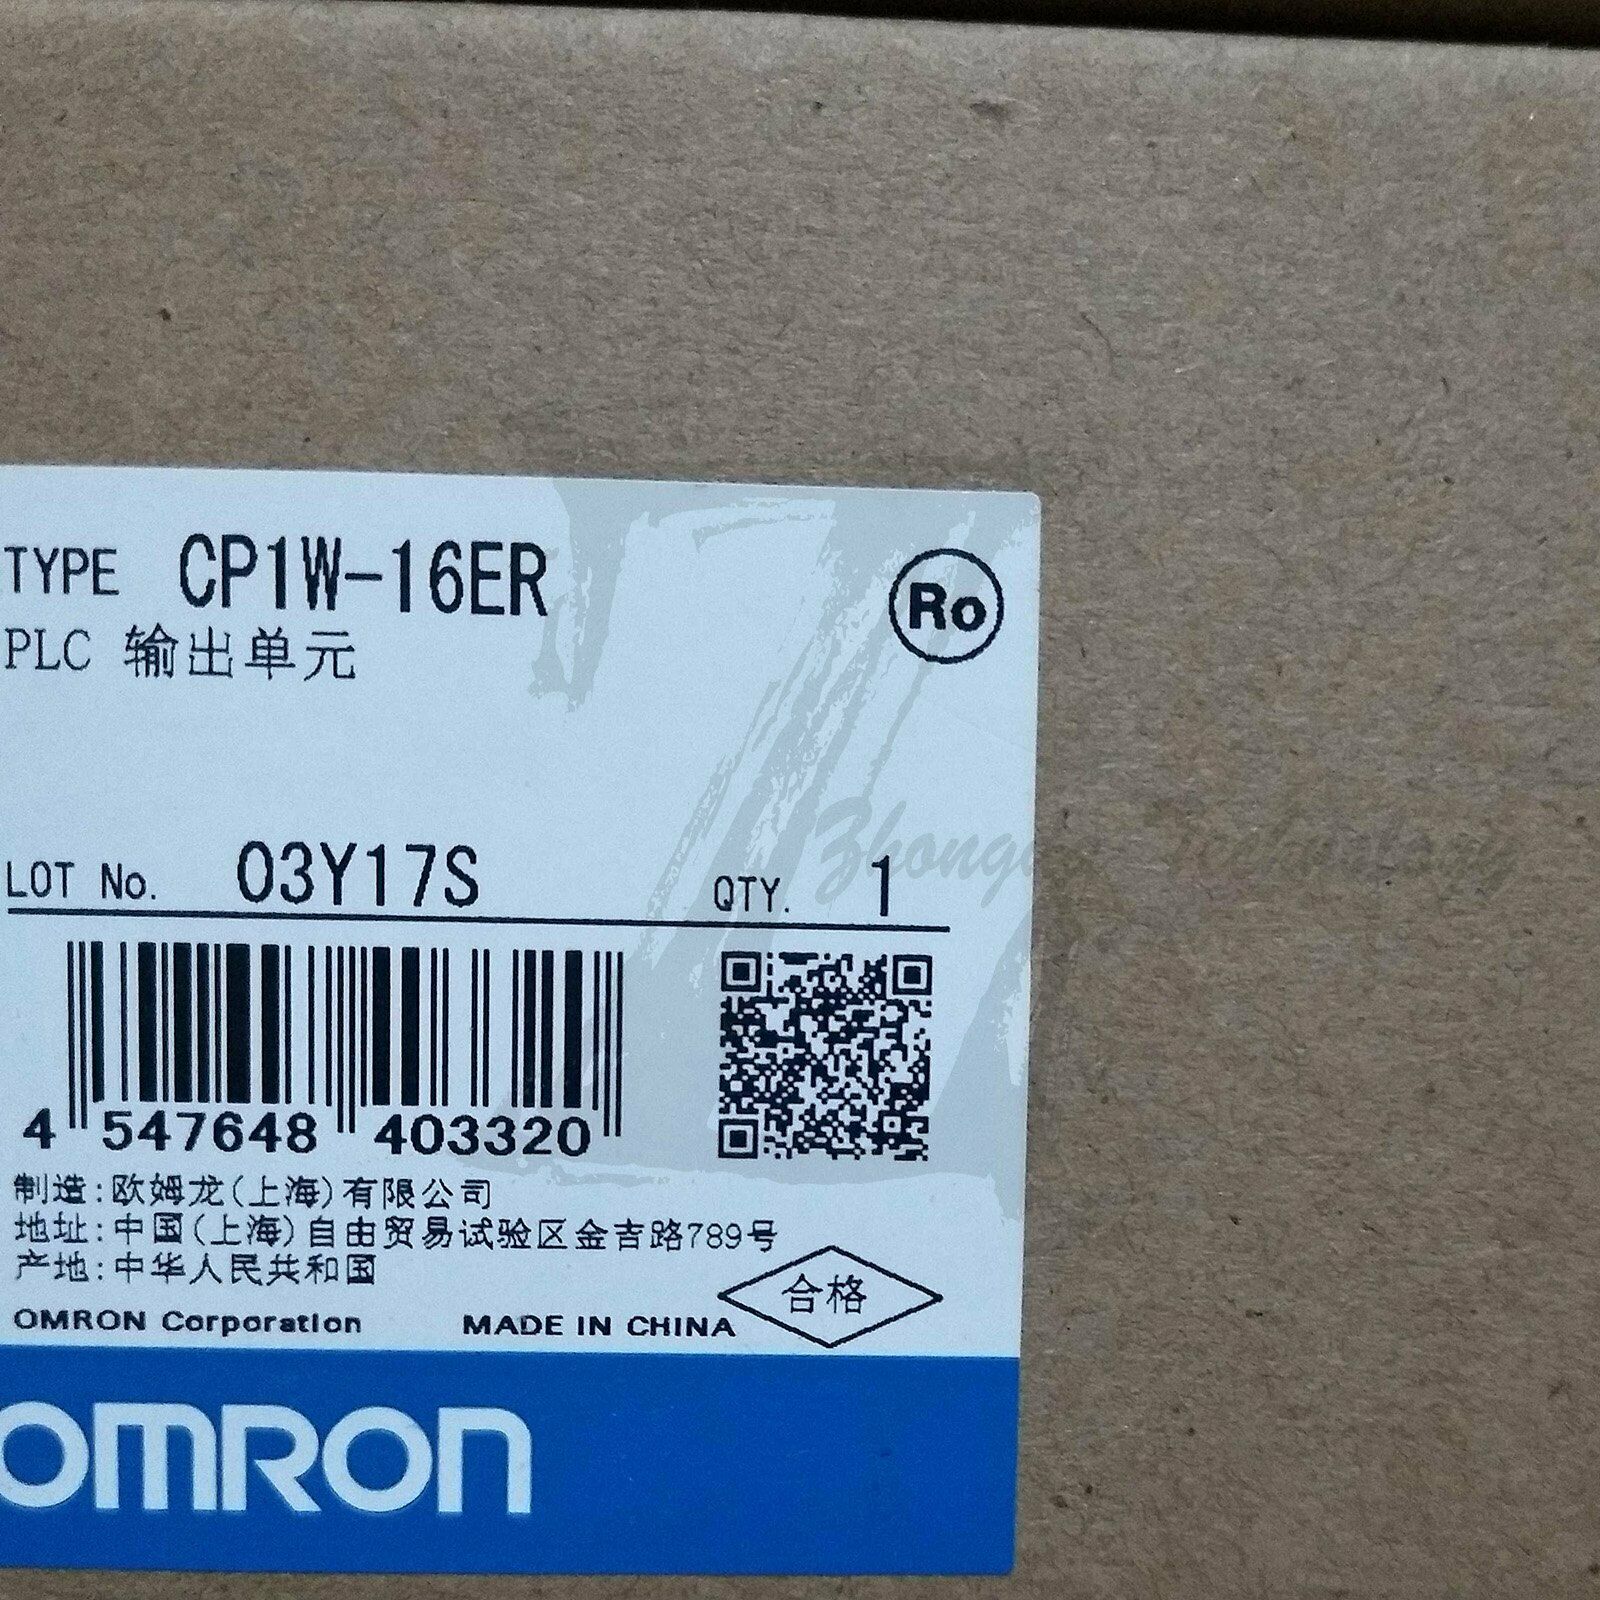 1pc new Omron output module CP1W-16ER one year warranty KOEED 201-500, 80%, import_2020_10_10_031751, Omron, Other